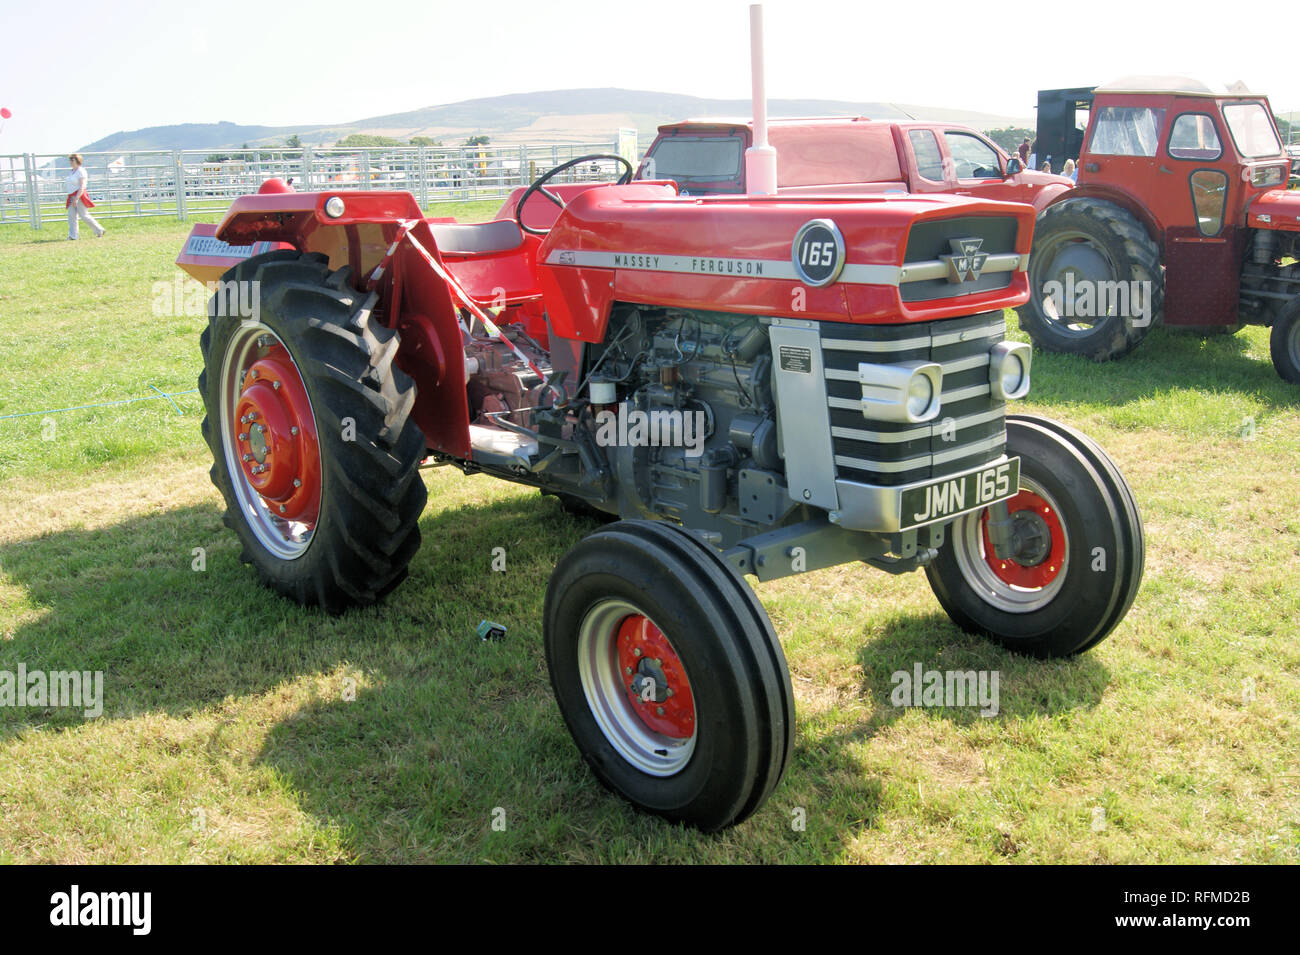 Massey Ferguson 165 High Resolution Stock Photography And Images Alamy